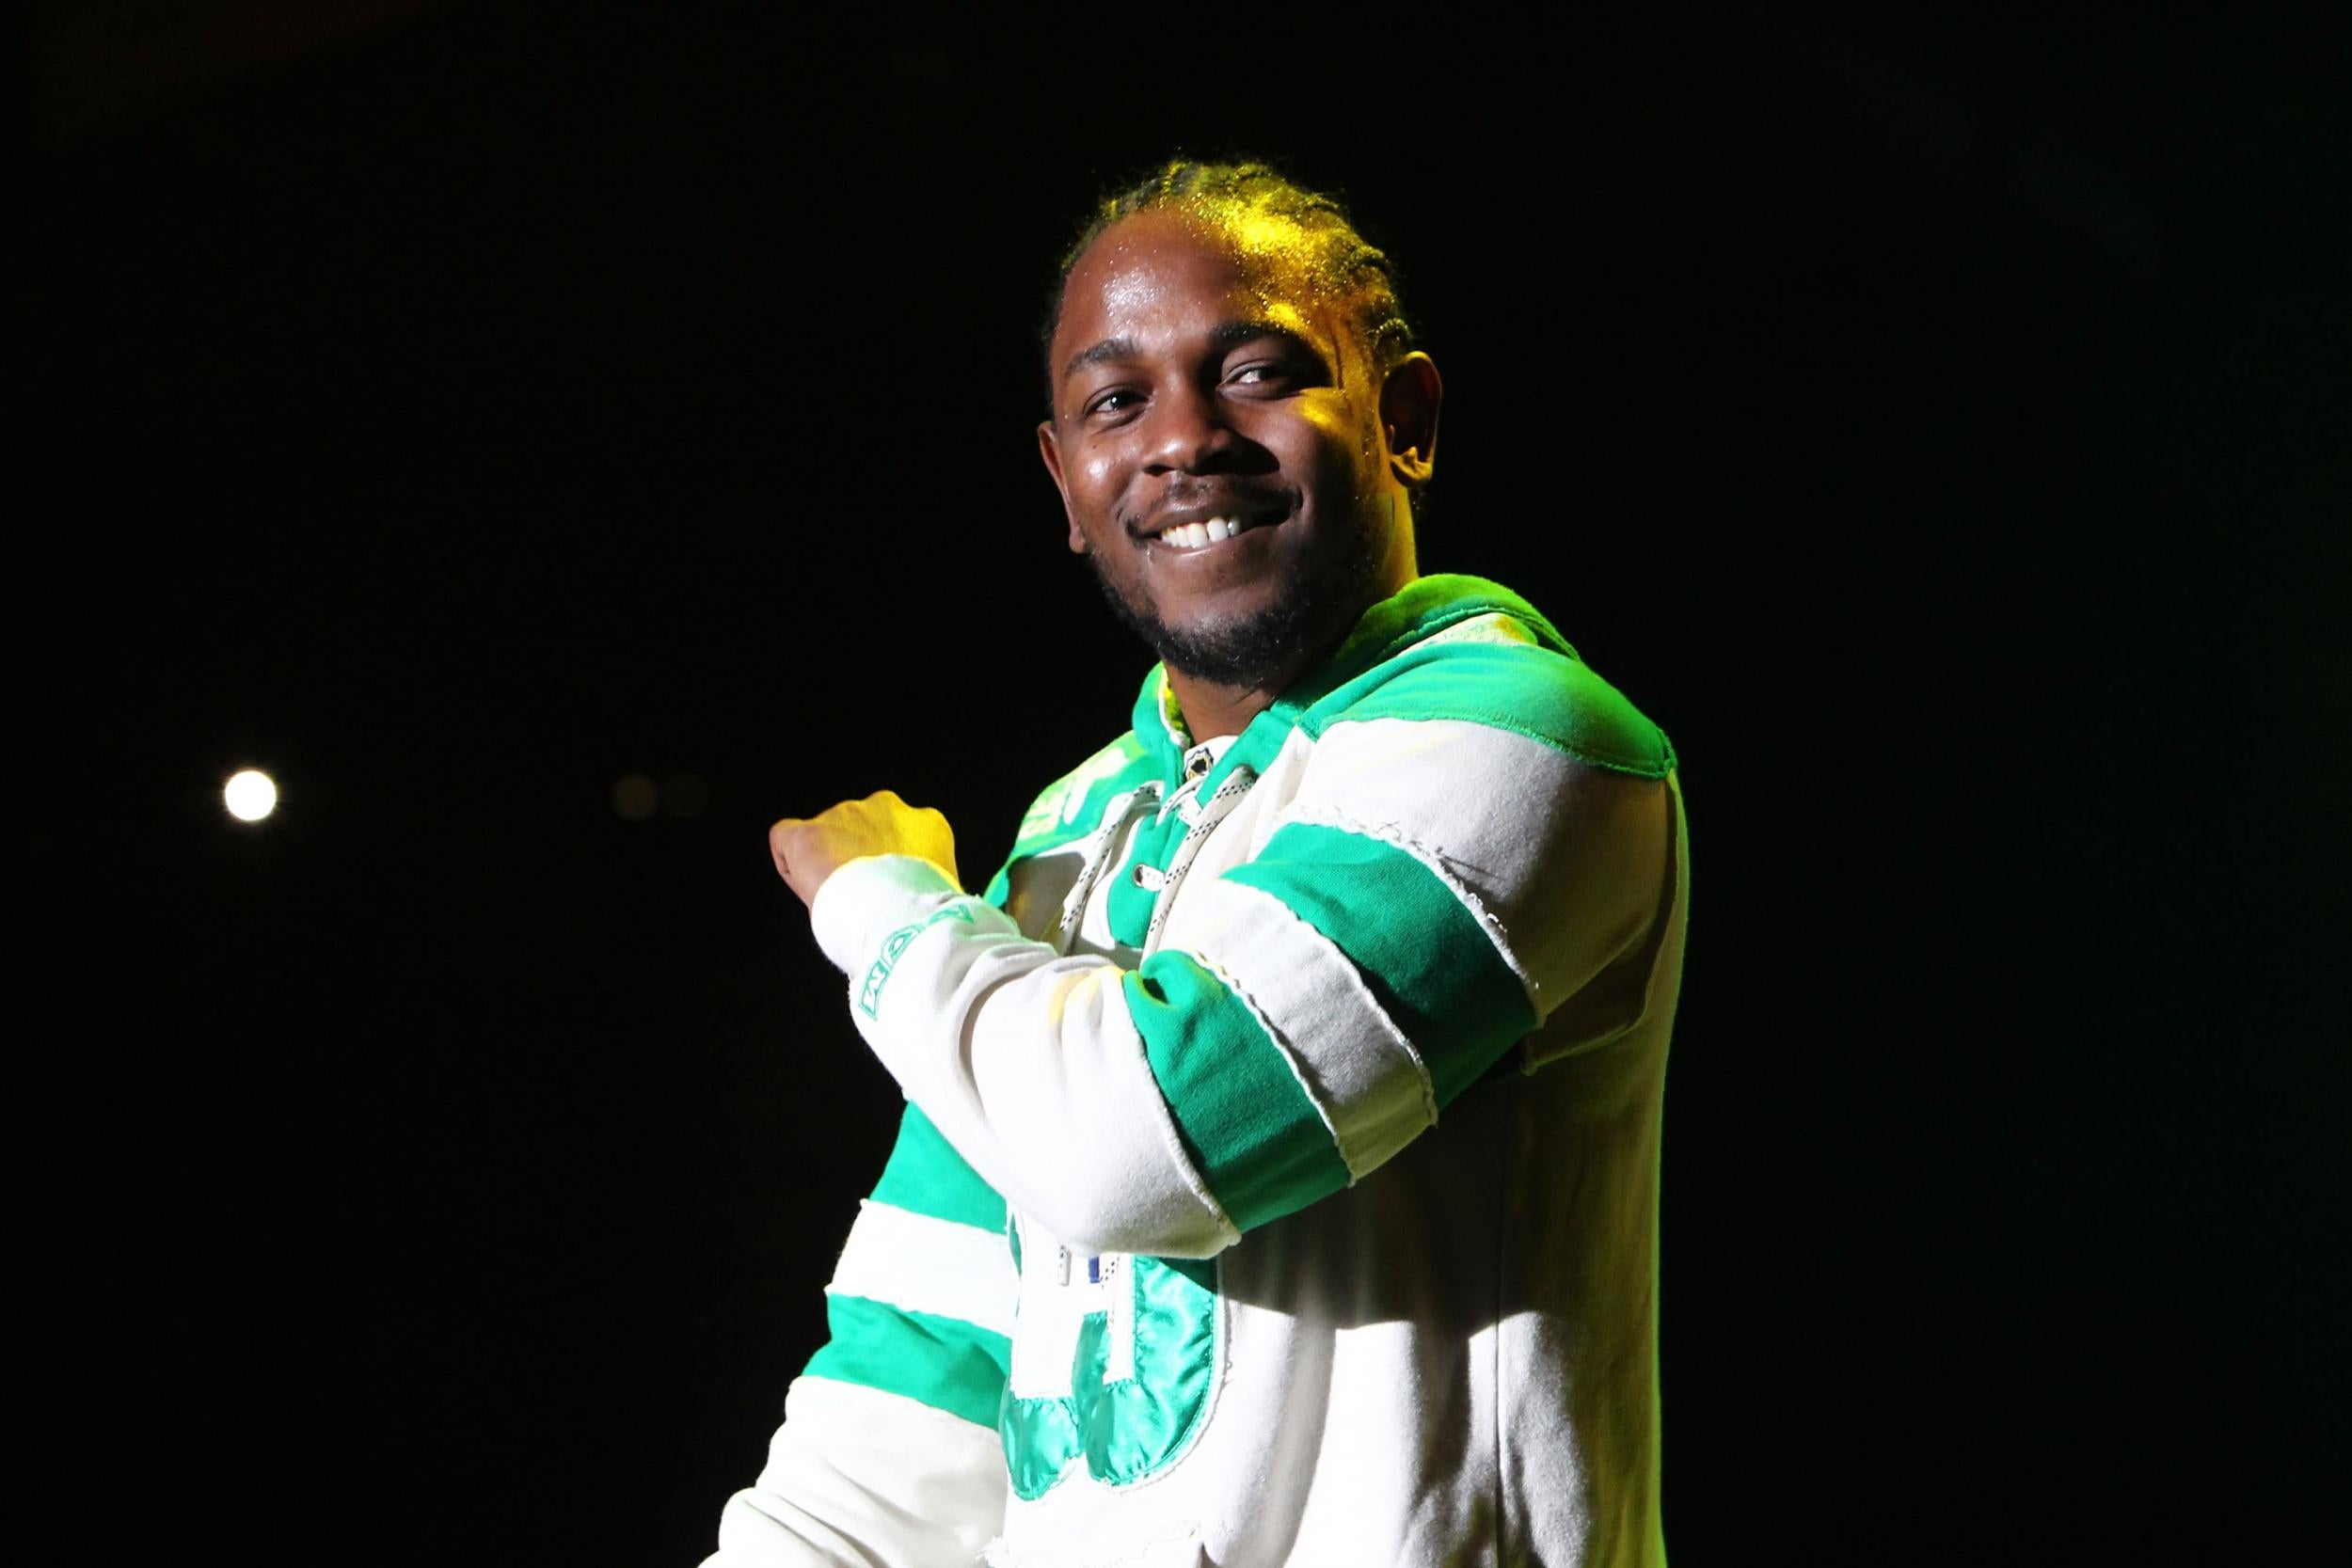 Another Kendrick Lamar album is on the way.